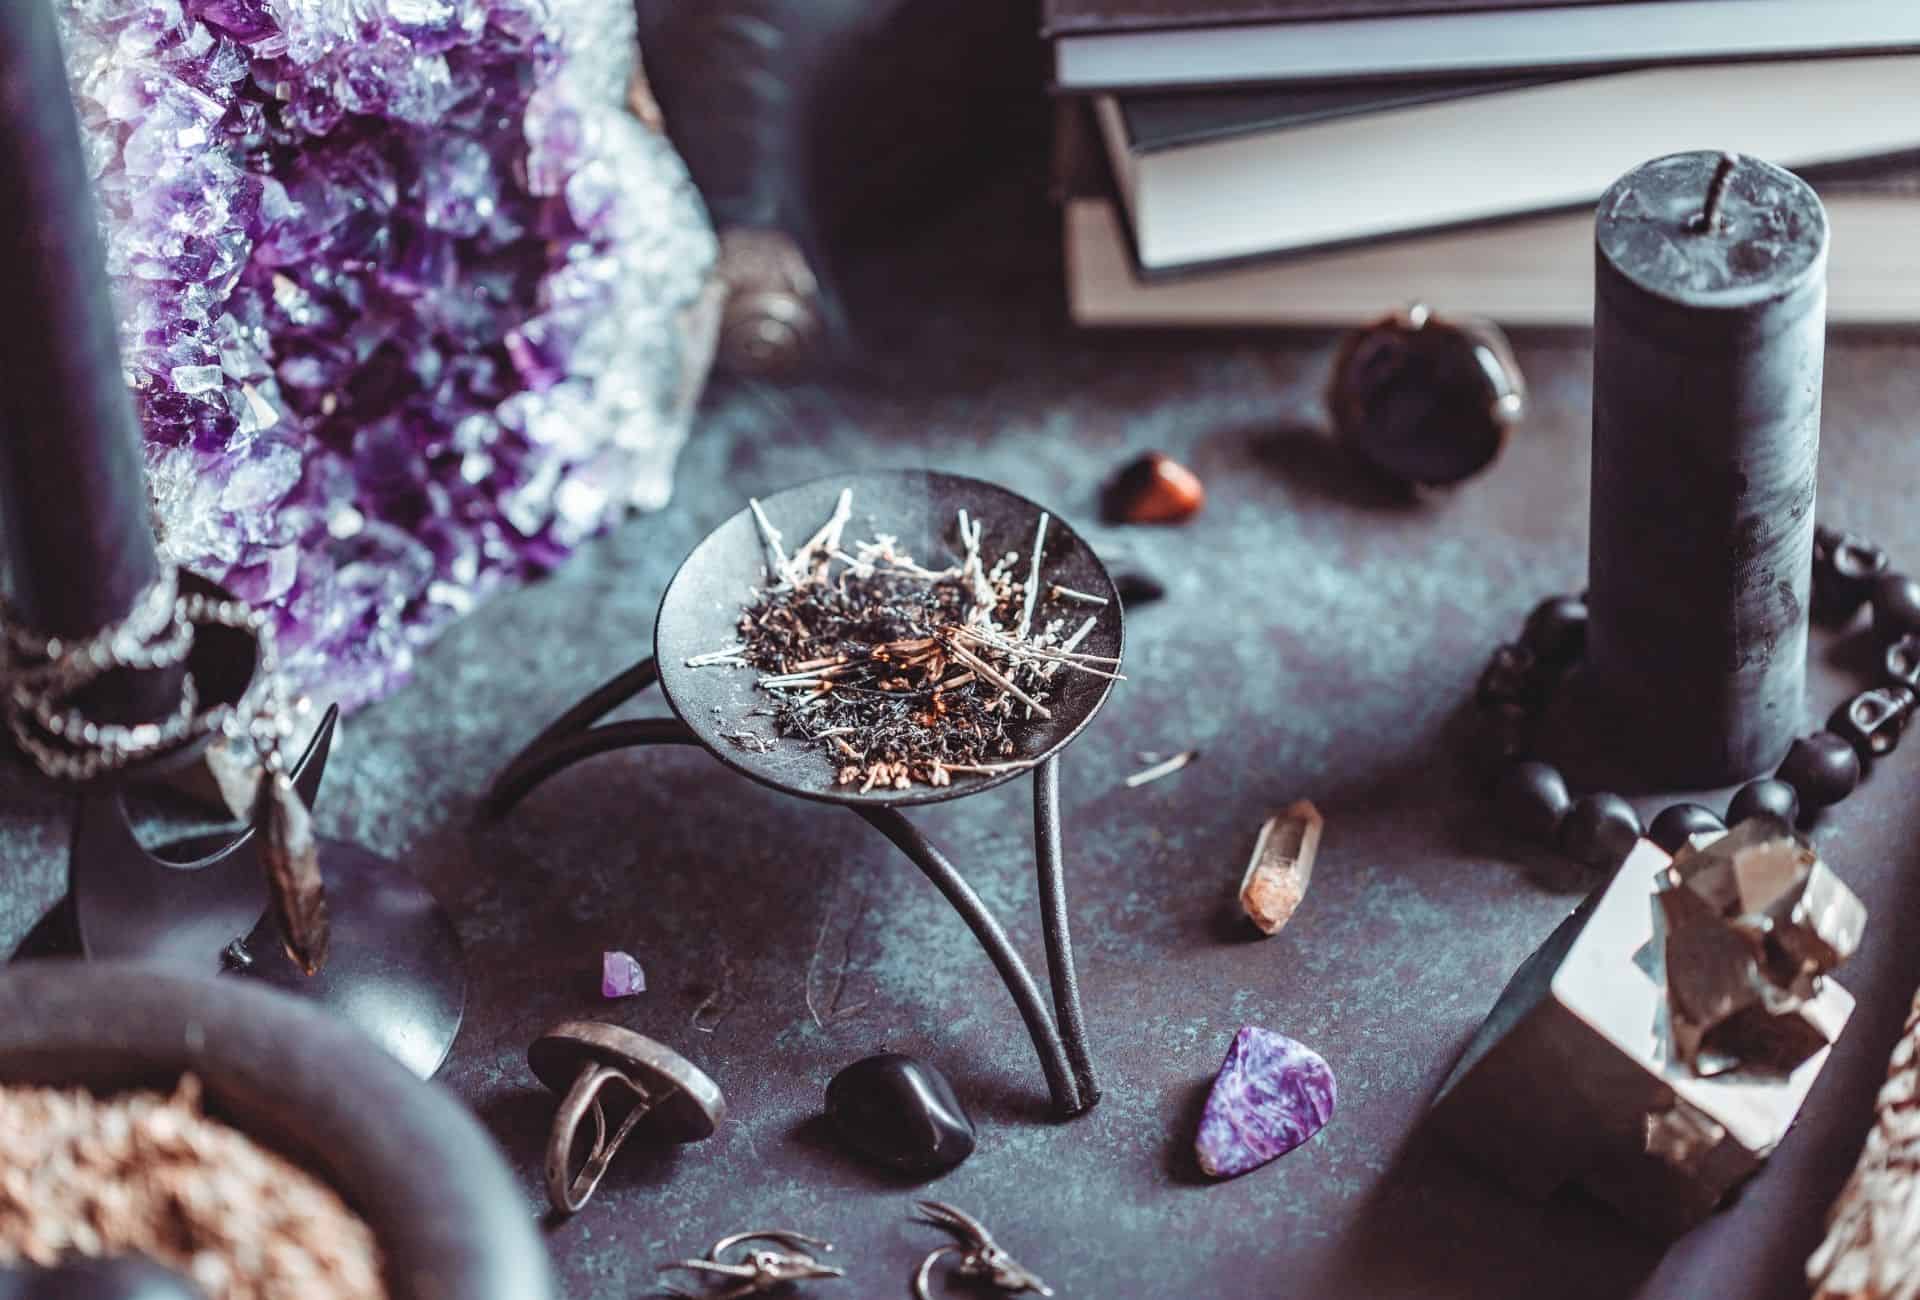 Witchy table with burned herbs in the middle.